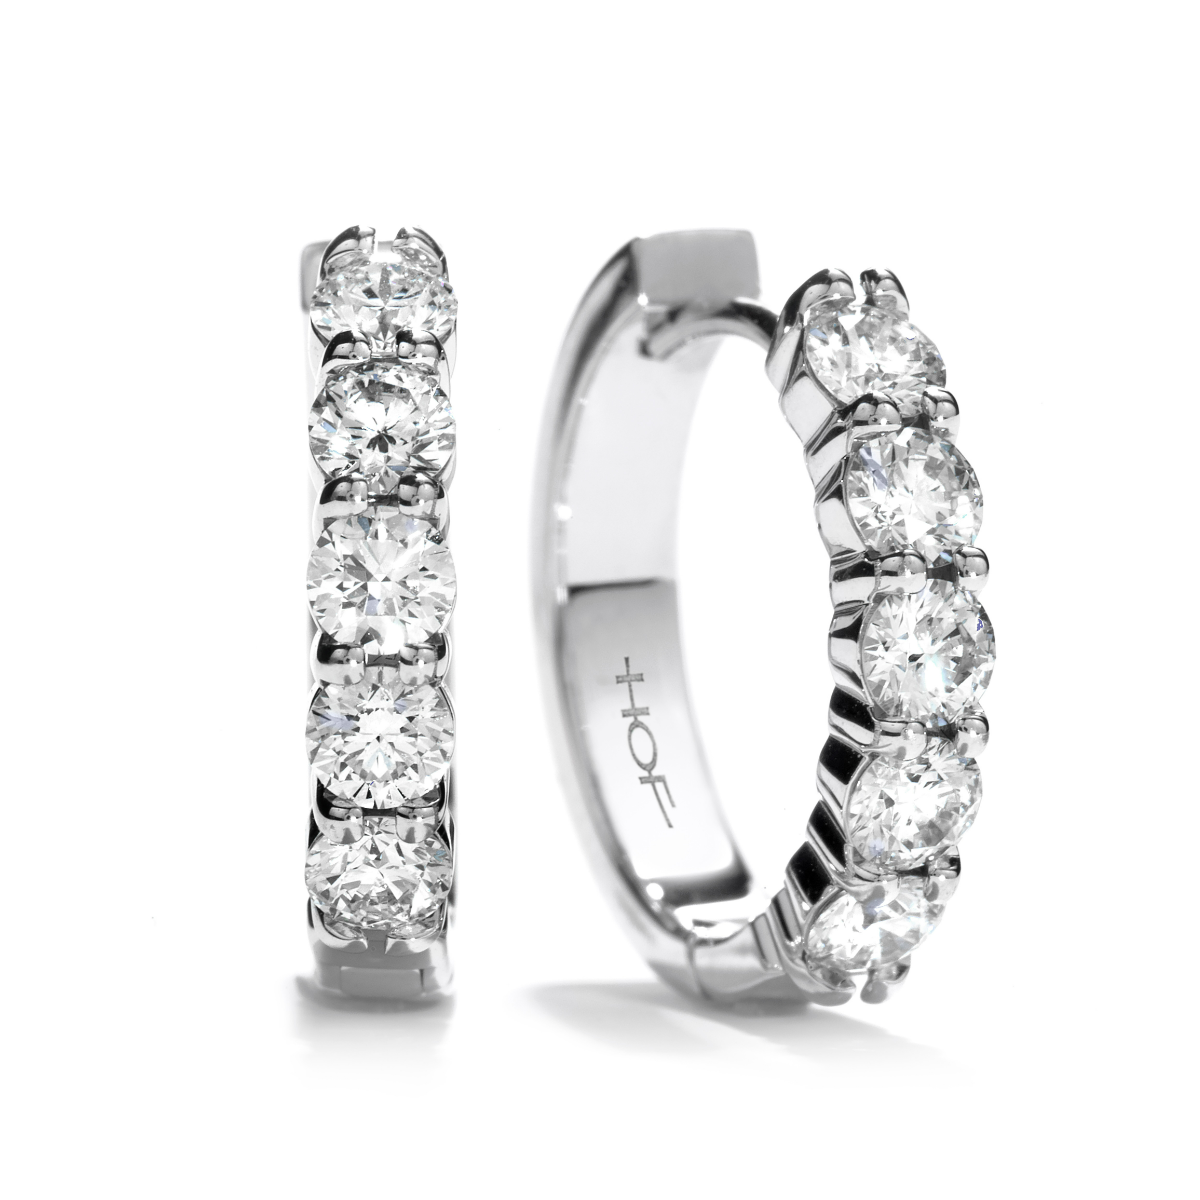 Hearts on Fire 18K White Gold Min Hoop Earrings with 10 Round Diamonds 0.97 Tcw I-J VS-SI